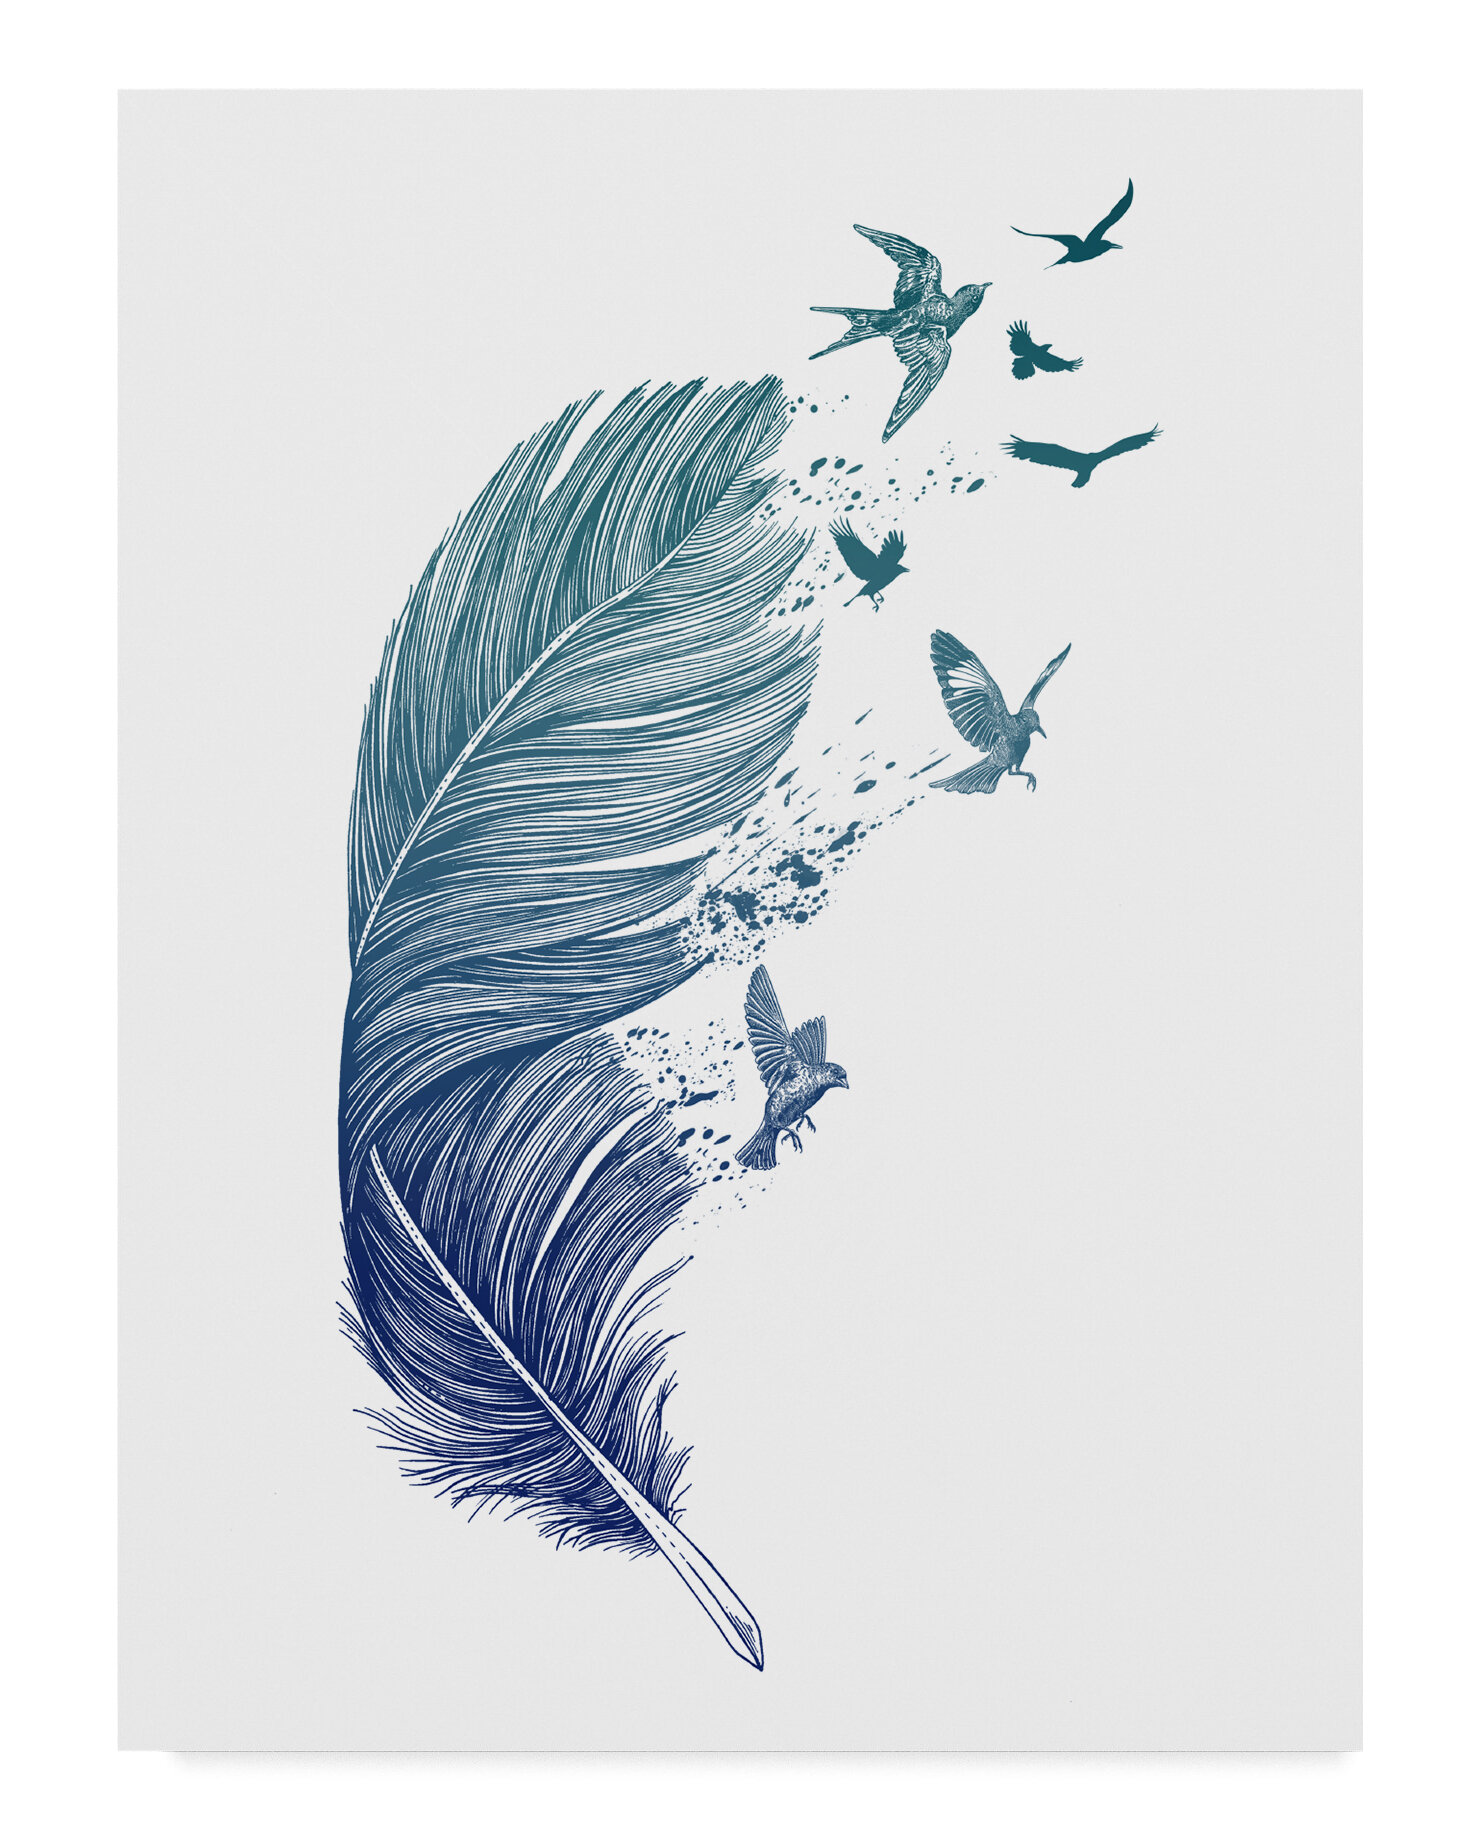 Ebern Designs Fly Away Feather Graphic Art Print On Wrapped Canvas Reviews Wayfair